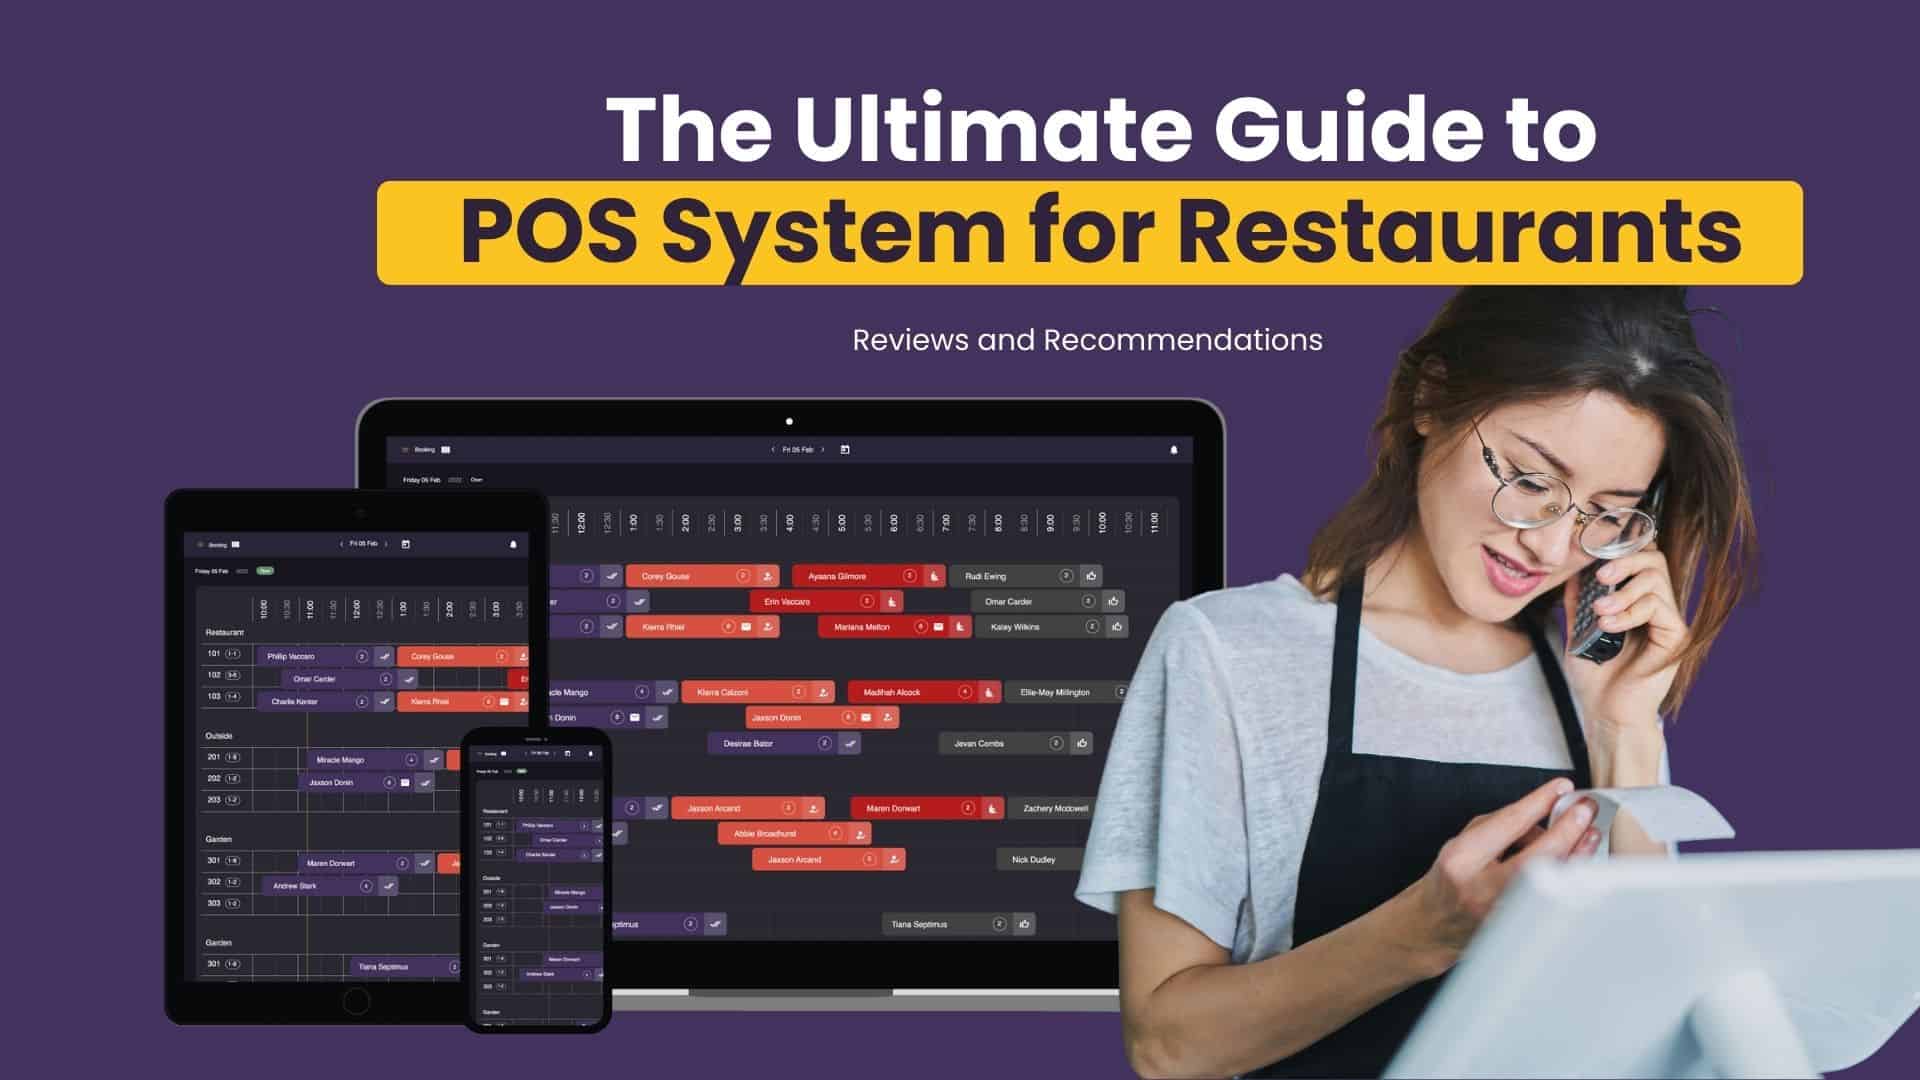 The ultimate guide to POS systems for restaurants: reviews and recommendations